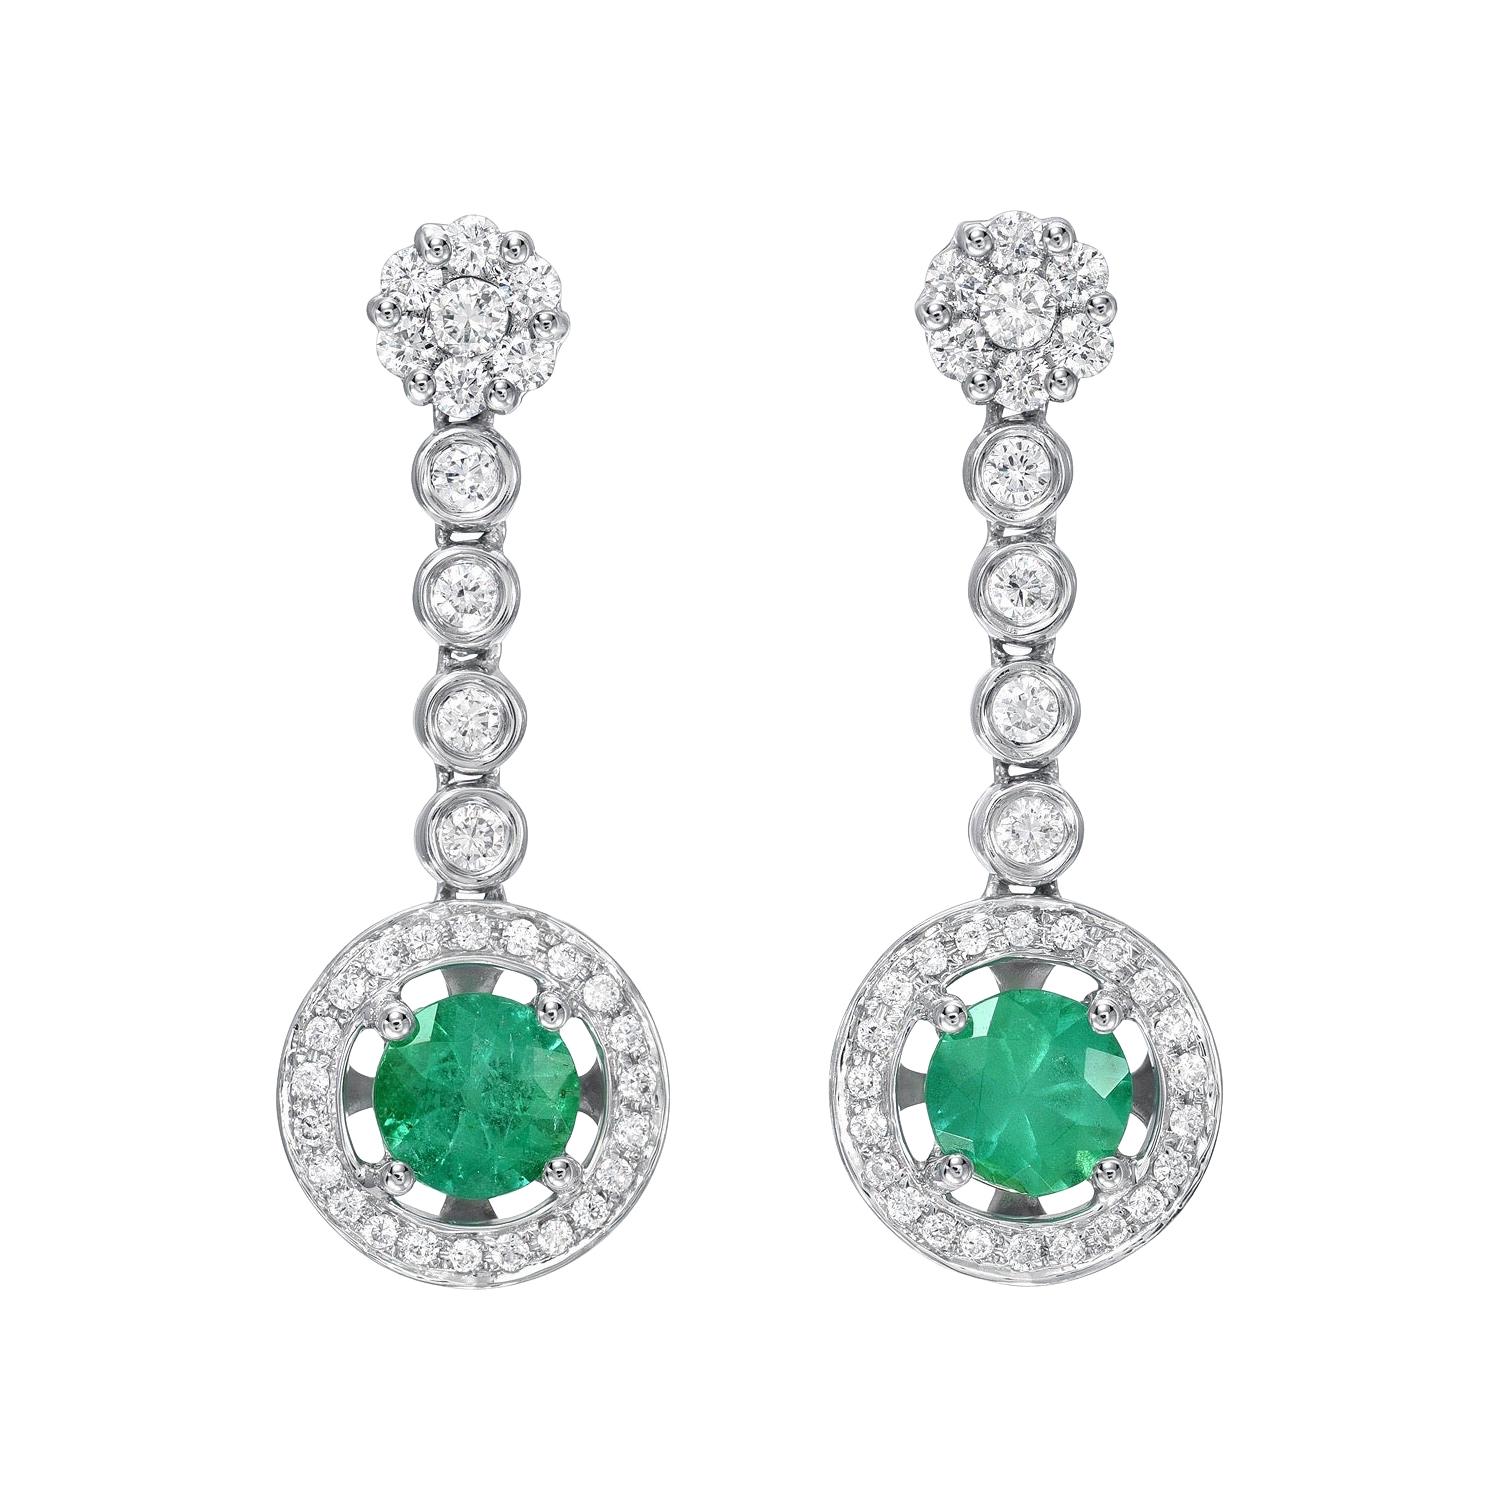 Emerald Earrings 0.98 Carats Round